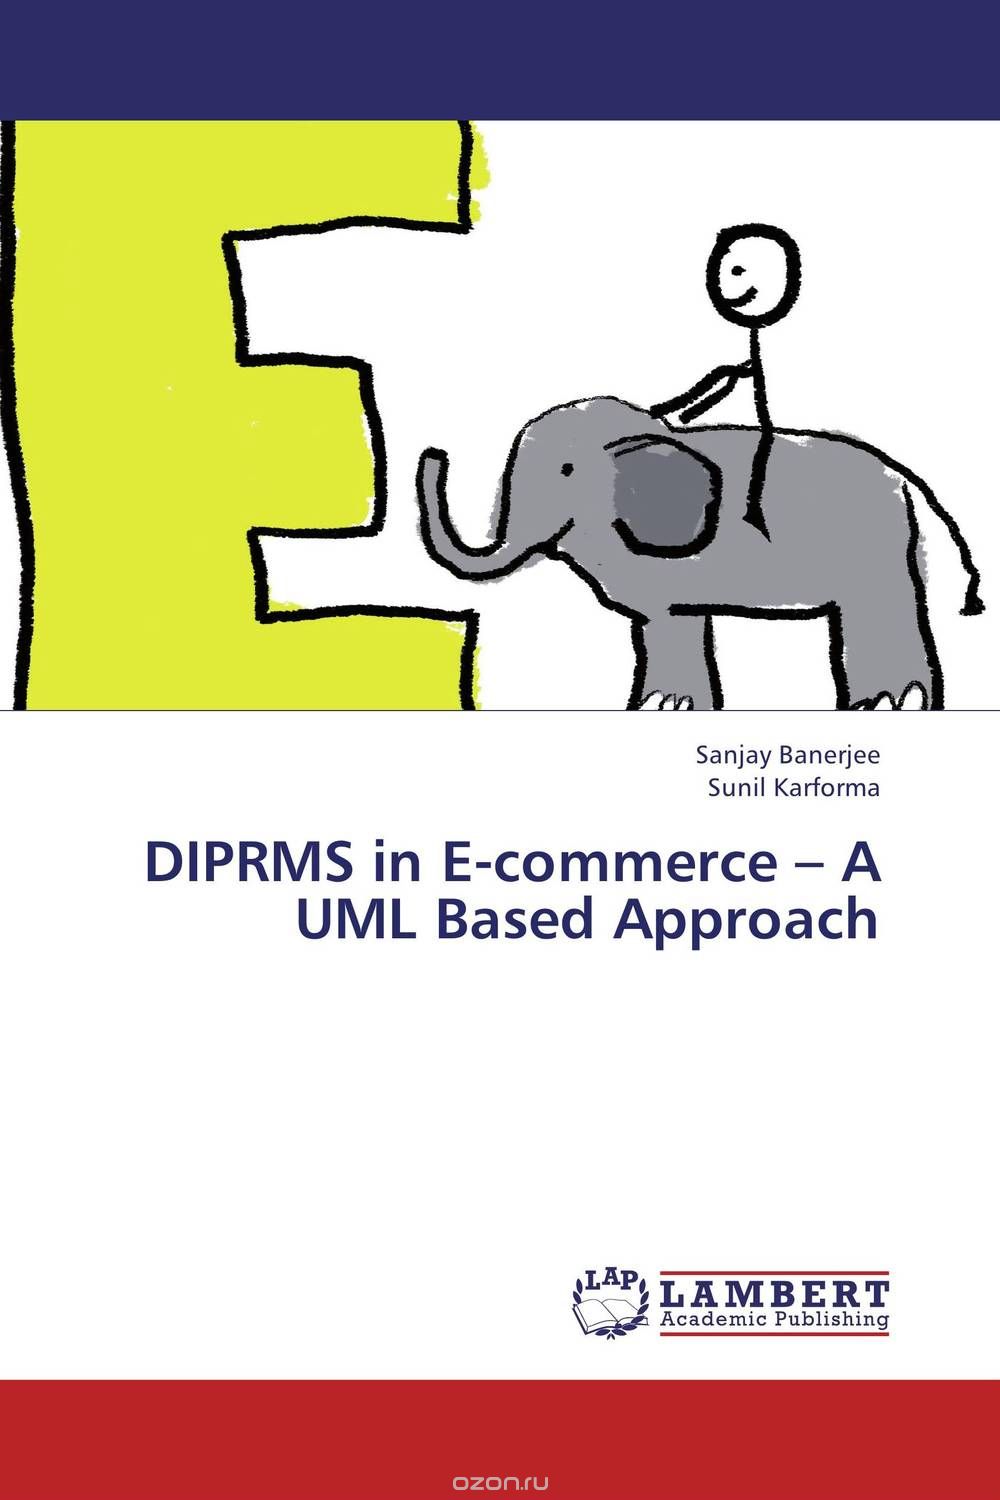 Скачать книгу "DIPRMS in E-commerce – A UML Based Approach"